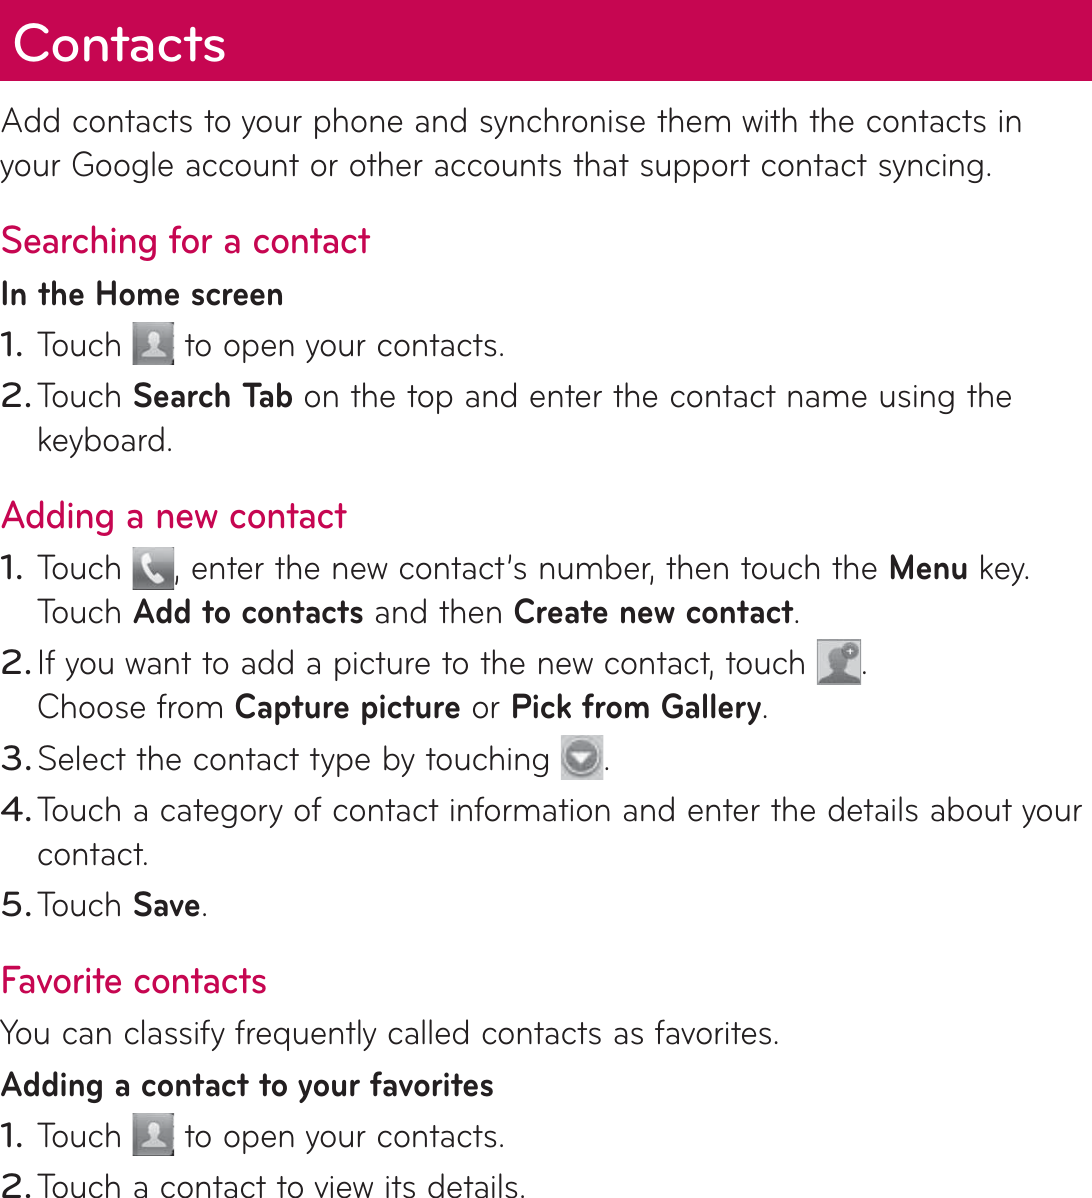 ContactsAdd contacts to your phone and synchronise them with the contacts in your Google account or other accounts that support contact syncing.Searching for a contactIn the Home screenTouch   to open your contacts. Touch Search Tab   on the top and enter the contact name using the keyboard.Adding a new contactTouch  , enter the new contact’s number, then touch the Menu key. Touch Add to contacts and then Create new contact. If you want to add a picture to the new contact, touch  . Choose from Capture picture or Pick from Gallery.Select the contact type by touching  .Touch a category of contact information and enter the details about your contact.Touch Save.Favorite contactsYou can classify frequently called contacts as favorites.Adding a contact to your favoritesTouch   to open your contacts.Touch a contact to view its details.1.2.1.2.3.4.5.1.2.